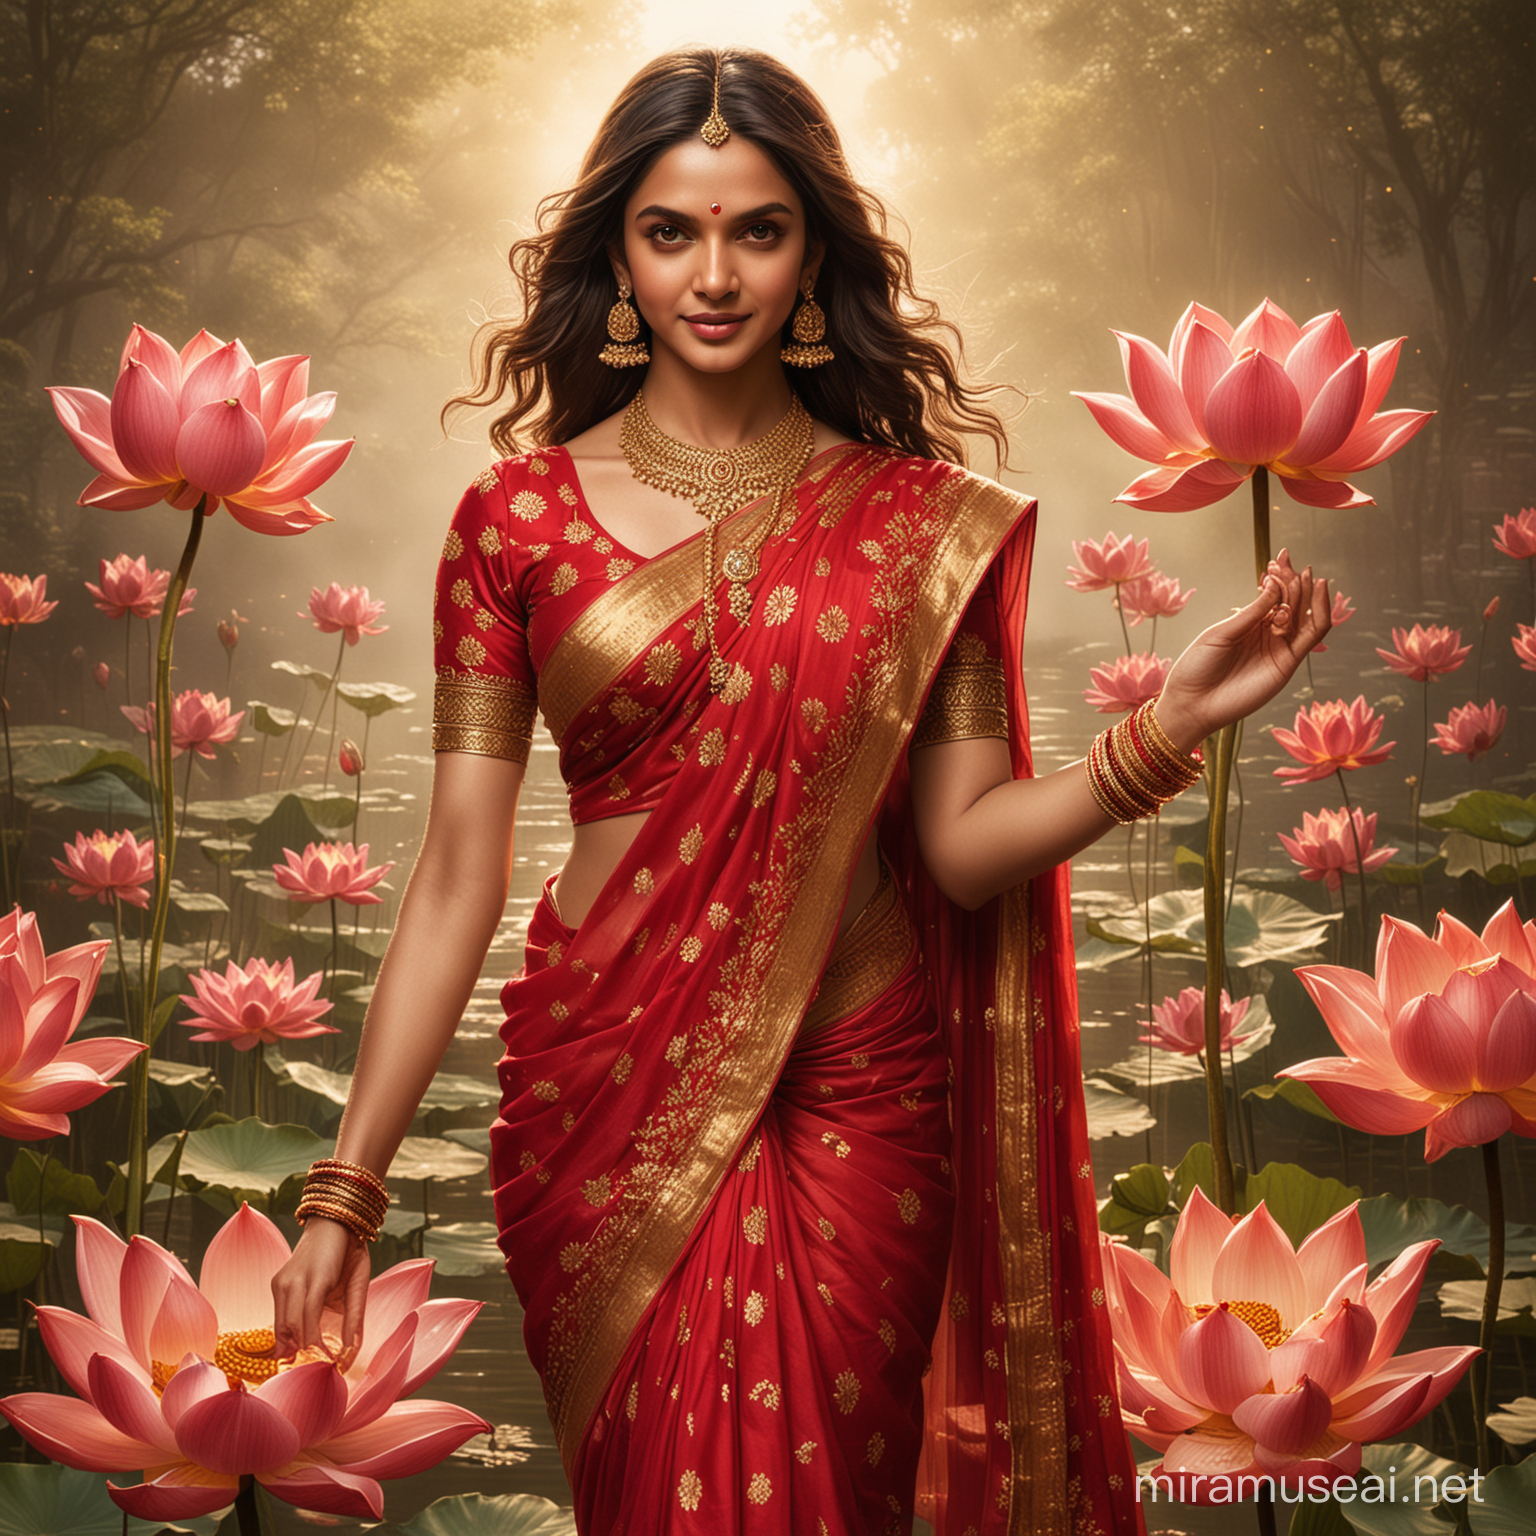 A masterpieced of Deepika Padukone as Lakshmi, the principal goddesses in Hinduism. She is wearing a a red sari embroidered with golden threads She is standing on a lotus and typically carrying a lotus in one or two hands.